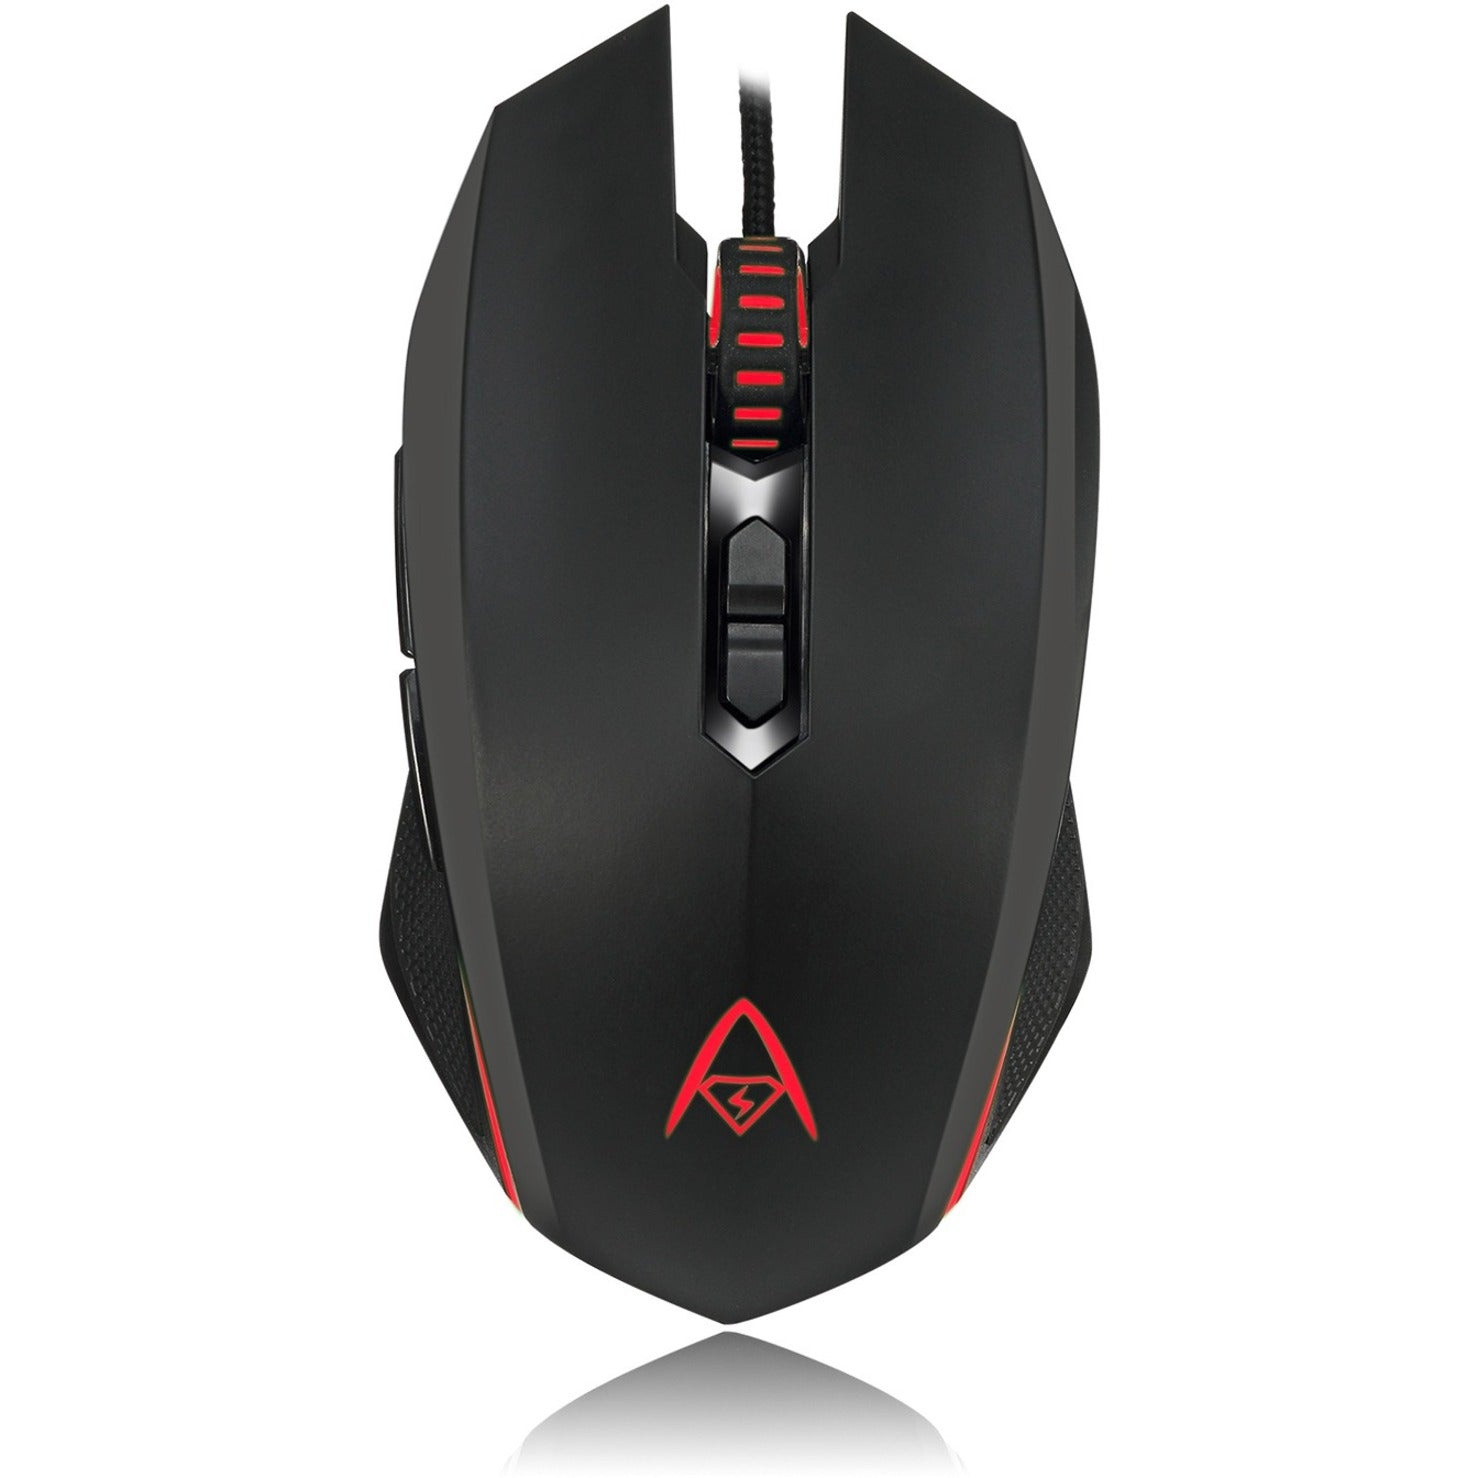 Adesso IMOUSE  X2 Multi-Color 7-Button Programmable Gaming Mouse, Ergonomic Fit, 3200 DPI, Windows 10 Compatible